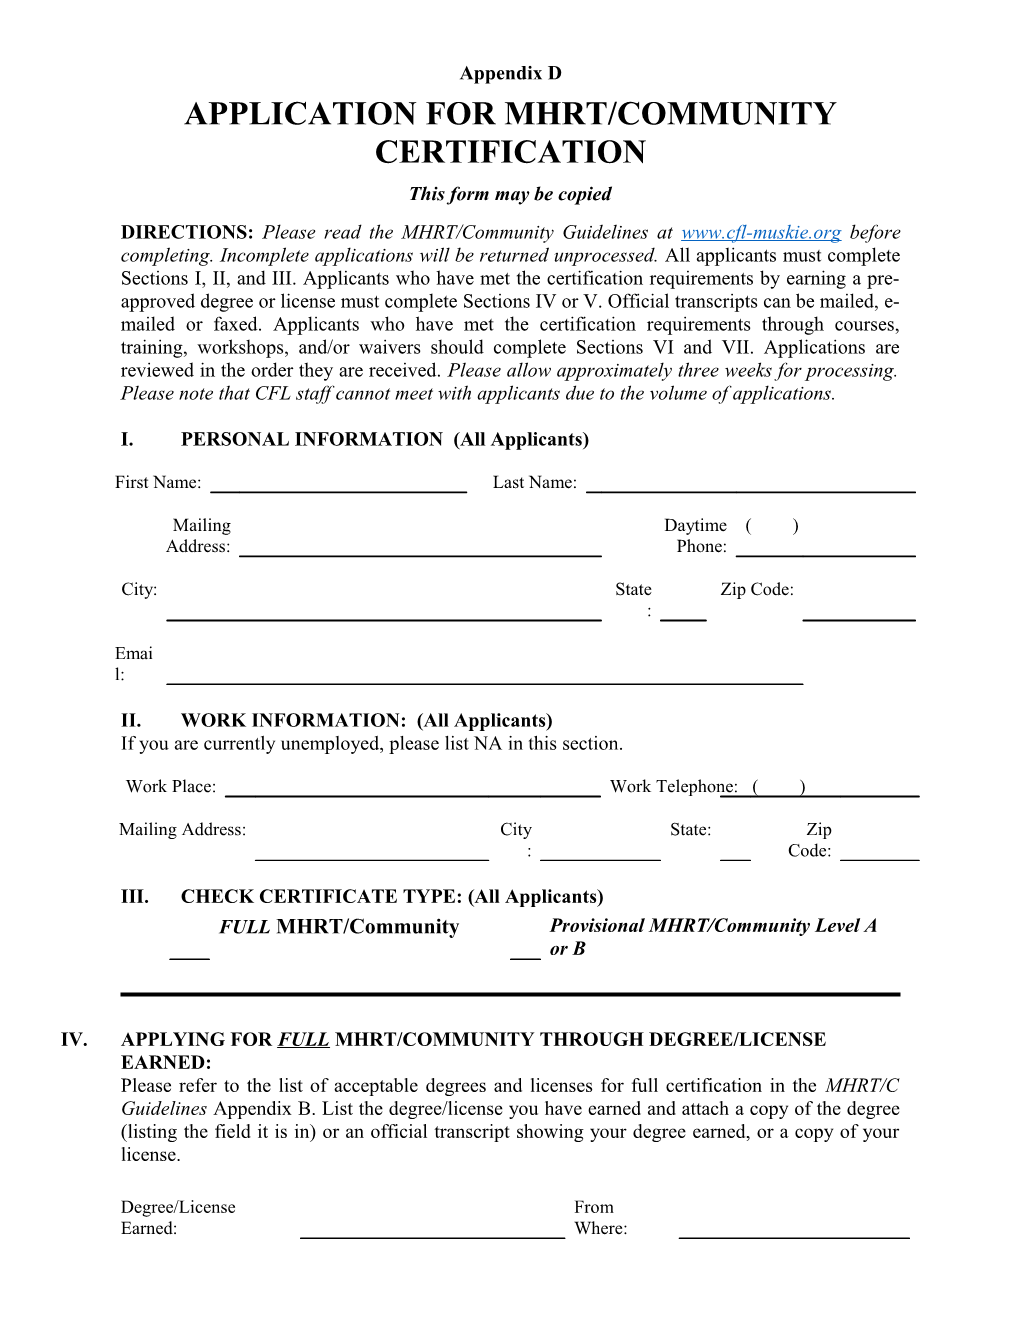 Application for Mhrt/Community Certification